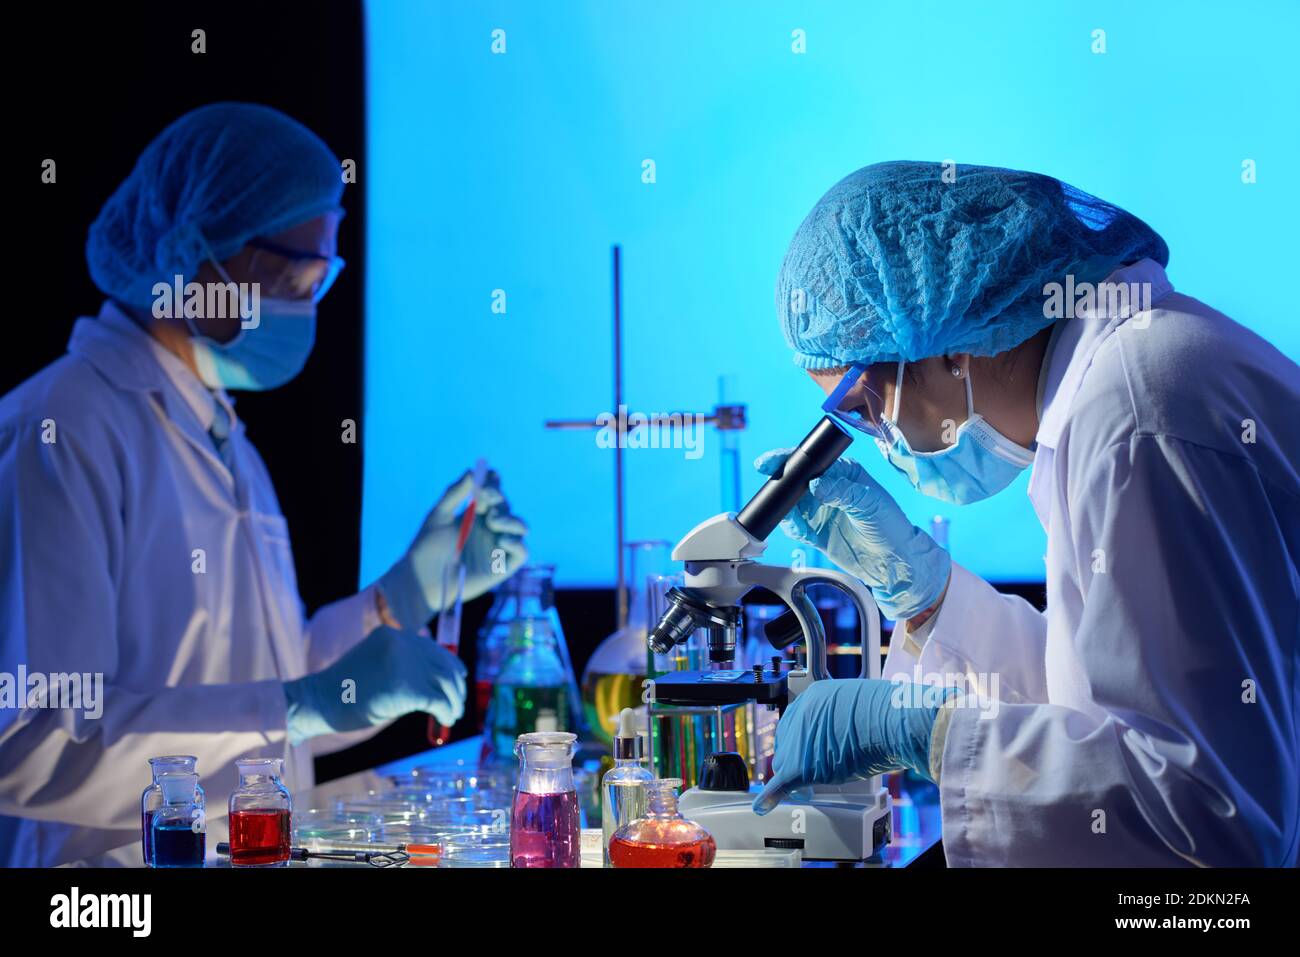 Team of scientists working on covid-19 vaccine in dark laboratory, mixing liquids and looking through microscope Stock Photo